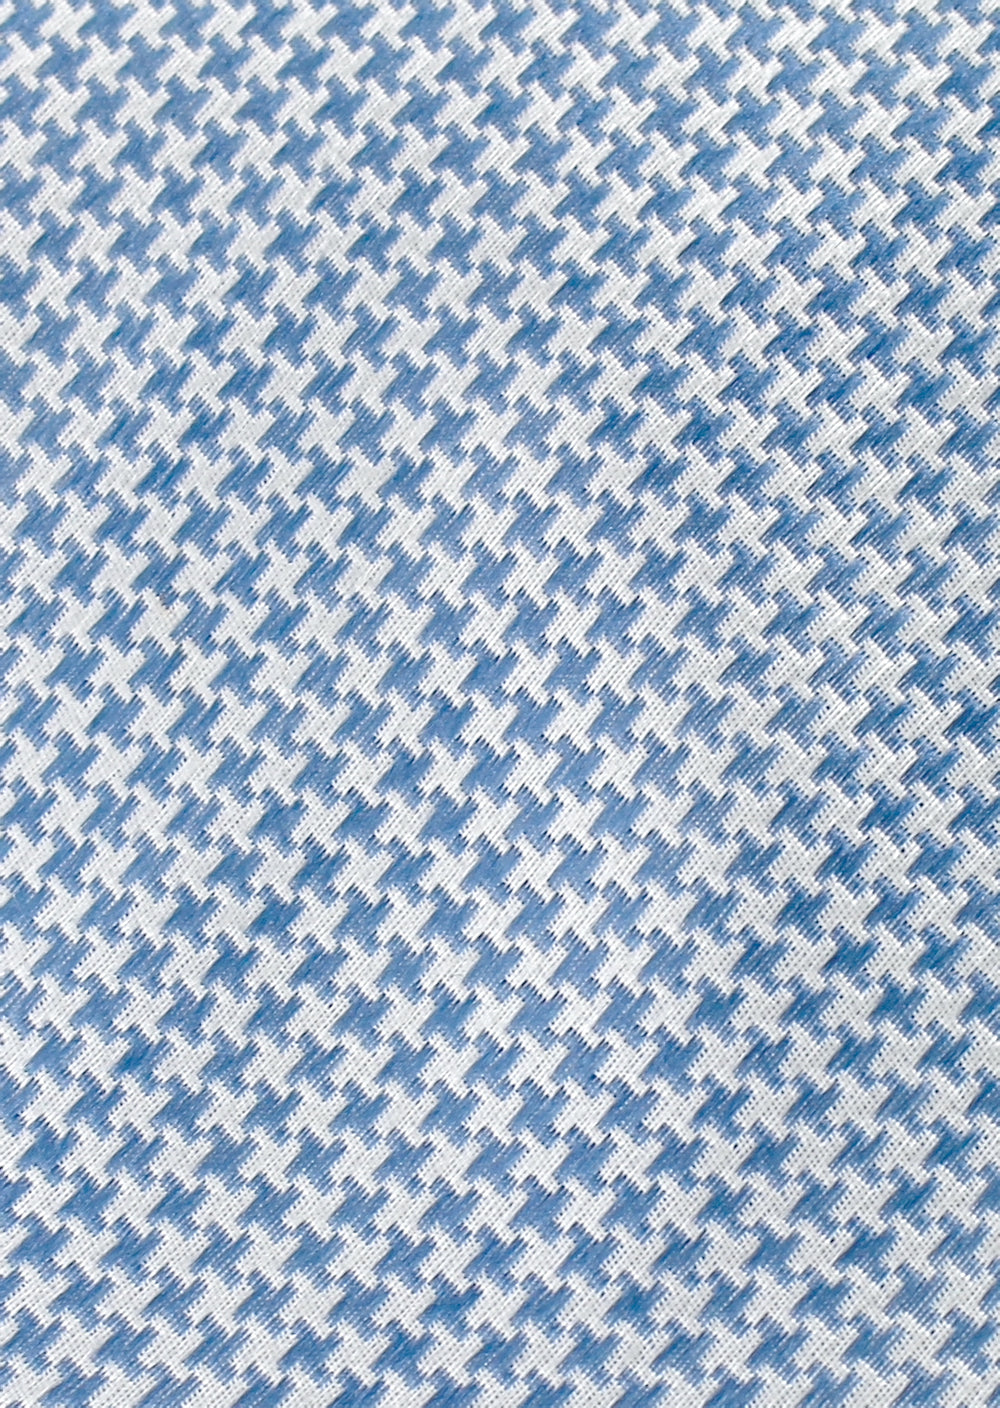 Sky blue tie with white patterns